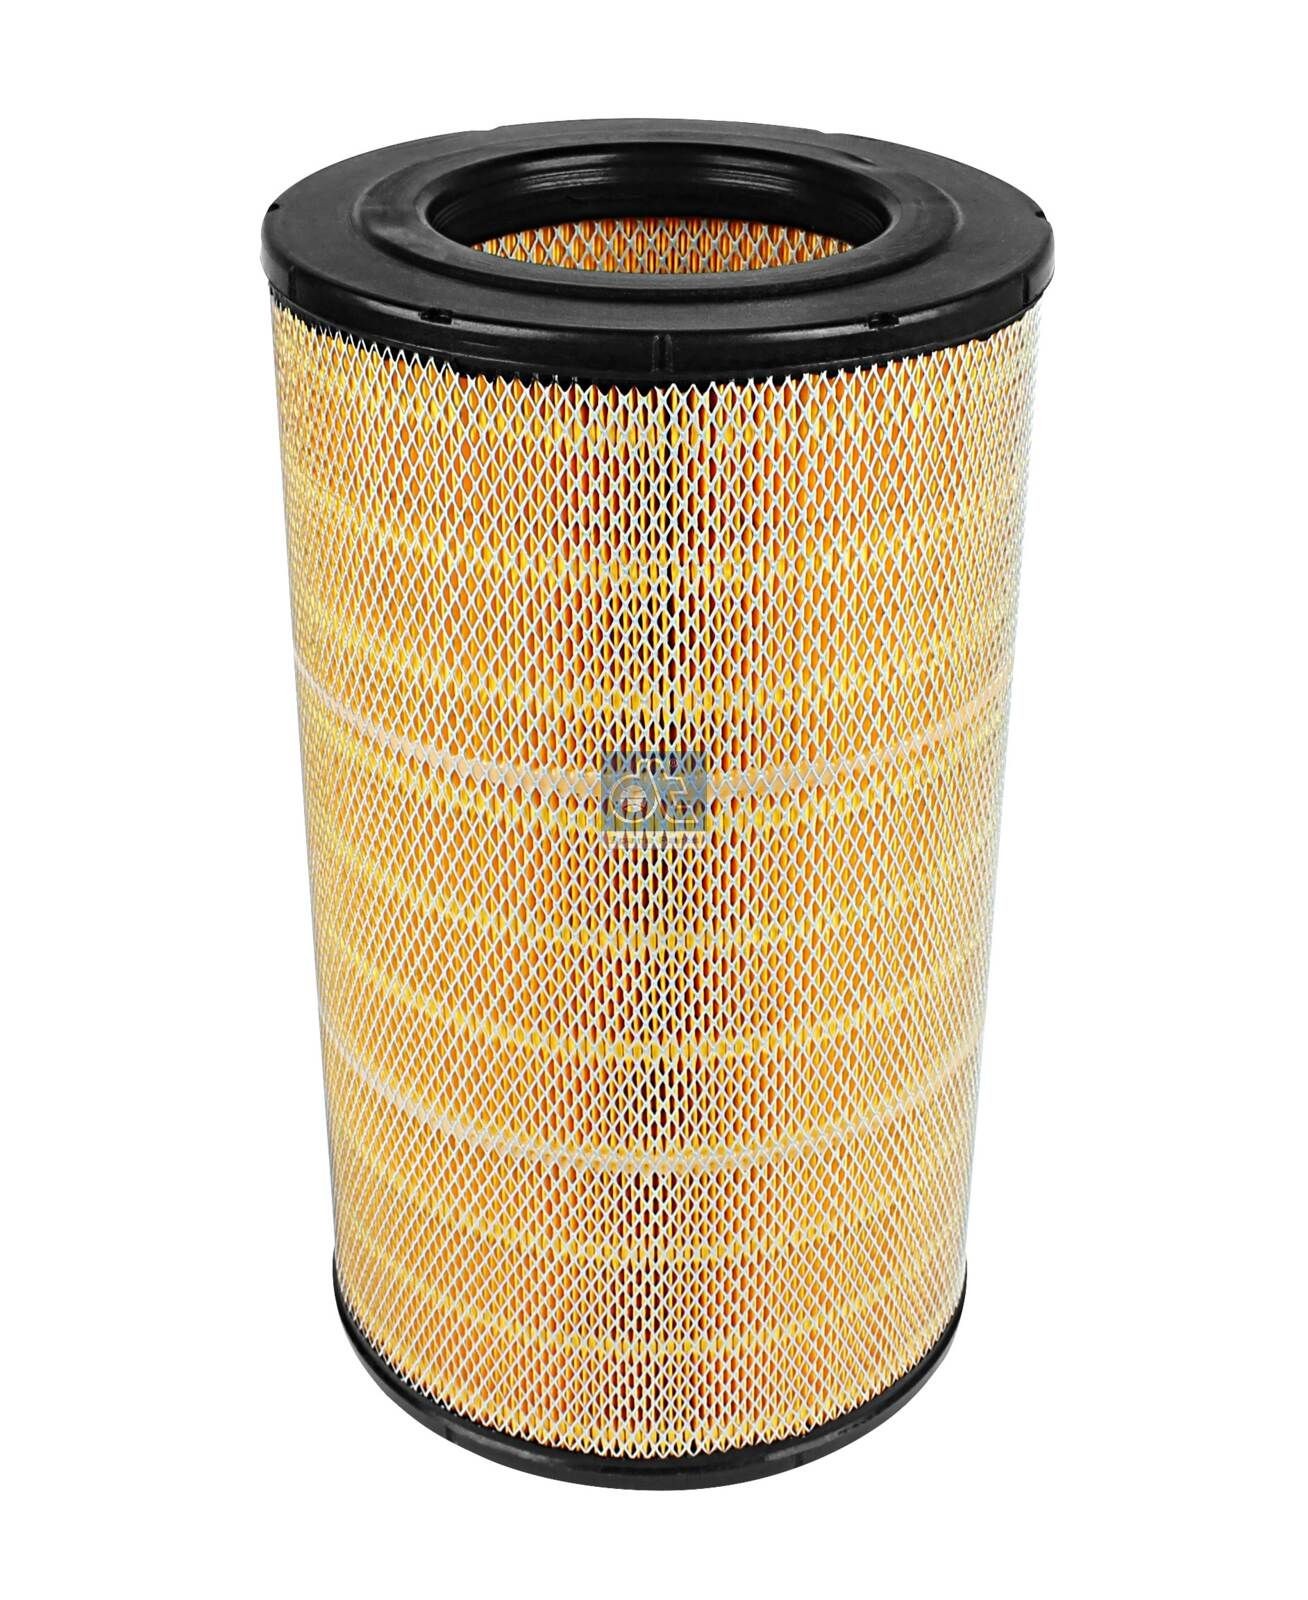 C 30 1500 DT Spare Parts 528mm, 304mm, Filter Insert Height: 528mm Engine air filter 1.10282 buy